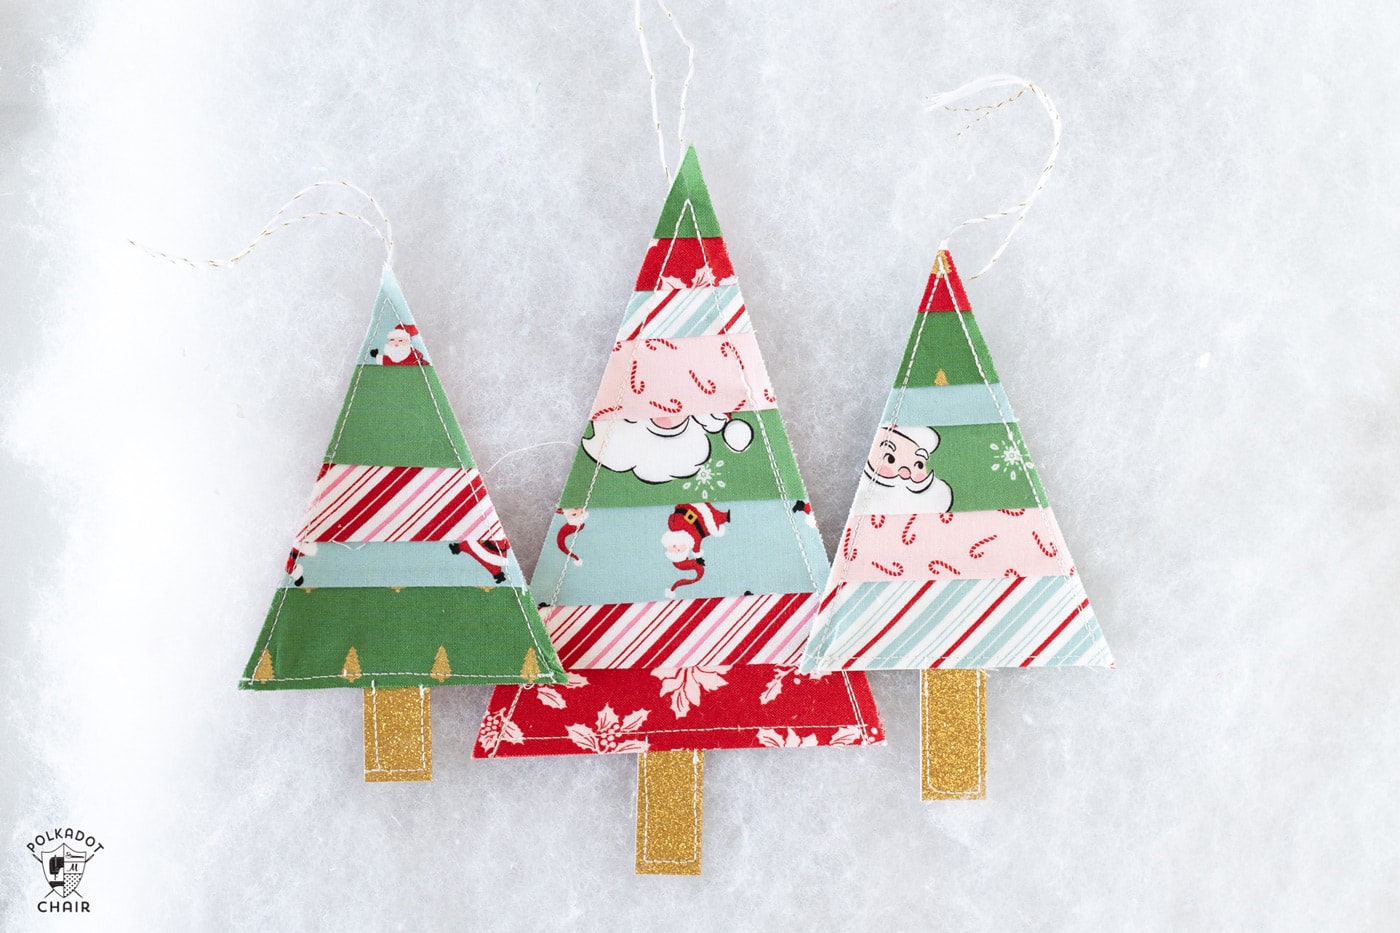 How to Make Yarn Wrapped Christmas Ornaments - Design Improvised